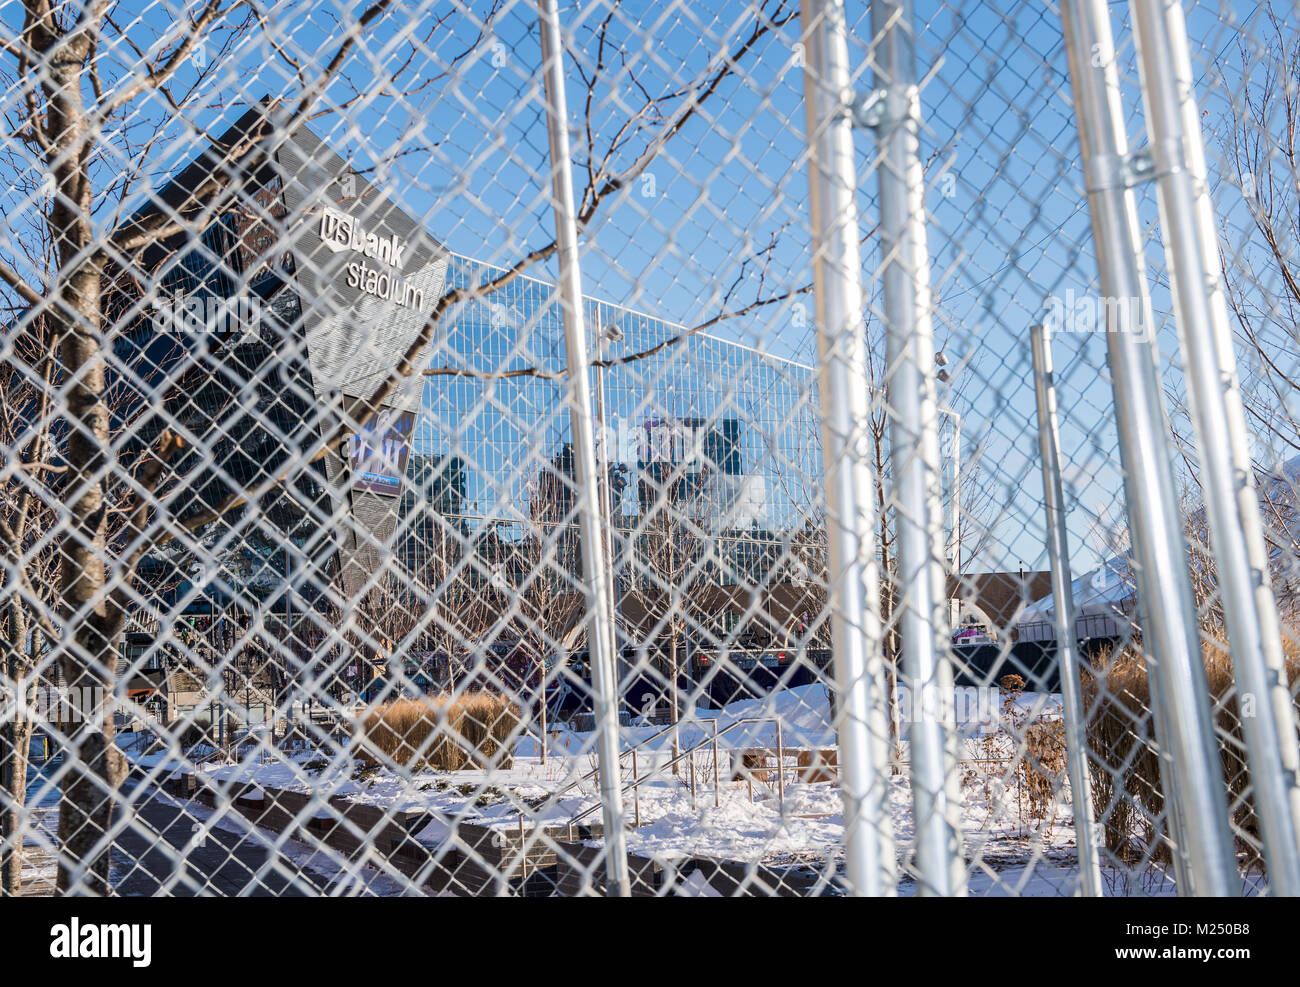 US Bank Stadium in Minneapolis, Minnesota was surrounded by security fences on game day for Super Bowl LII Stock Photo